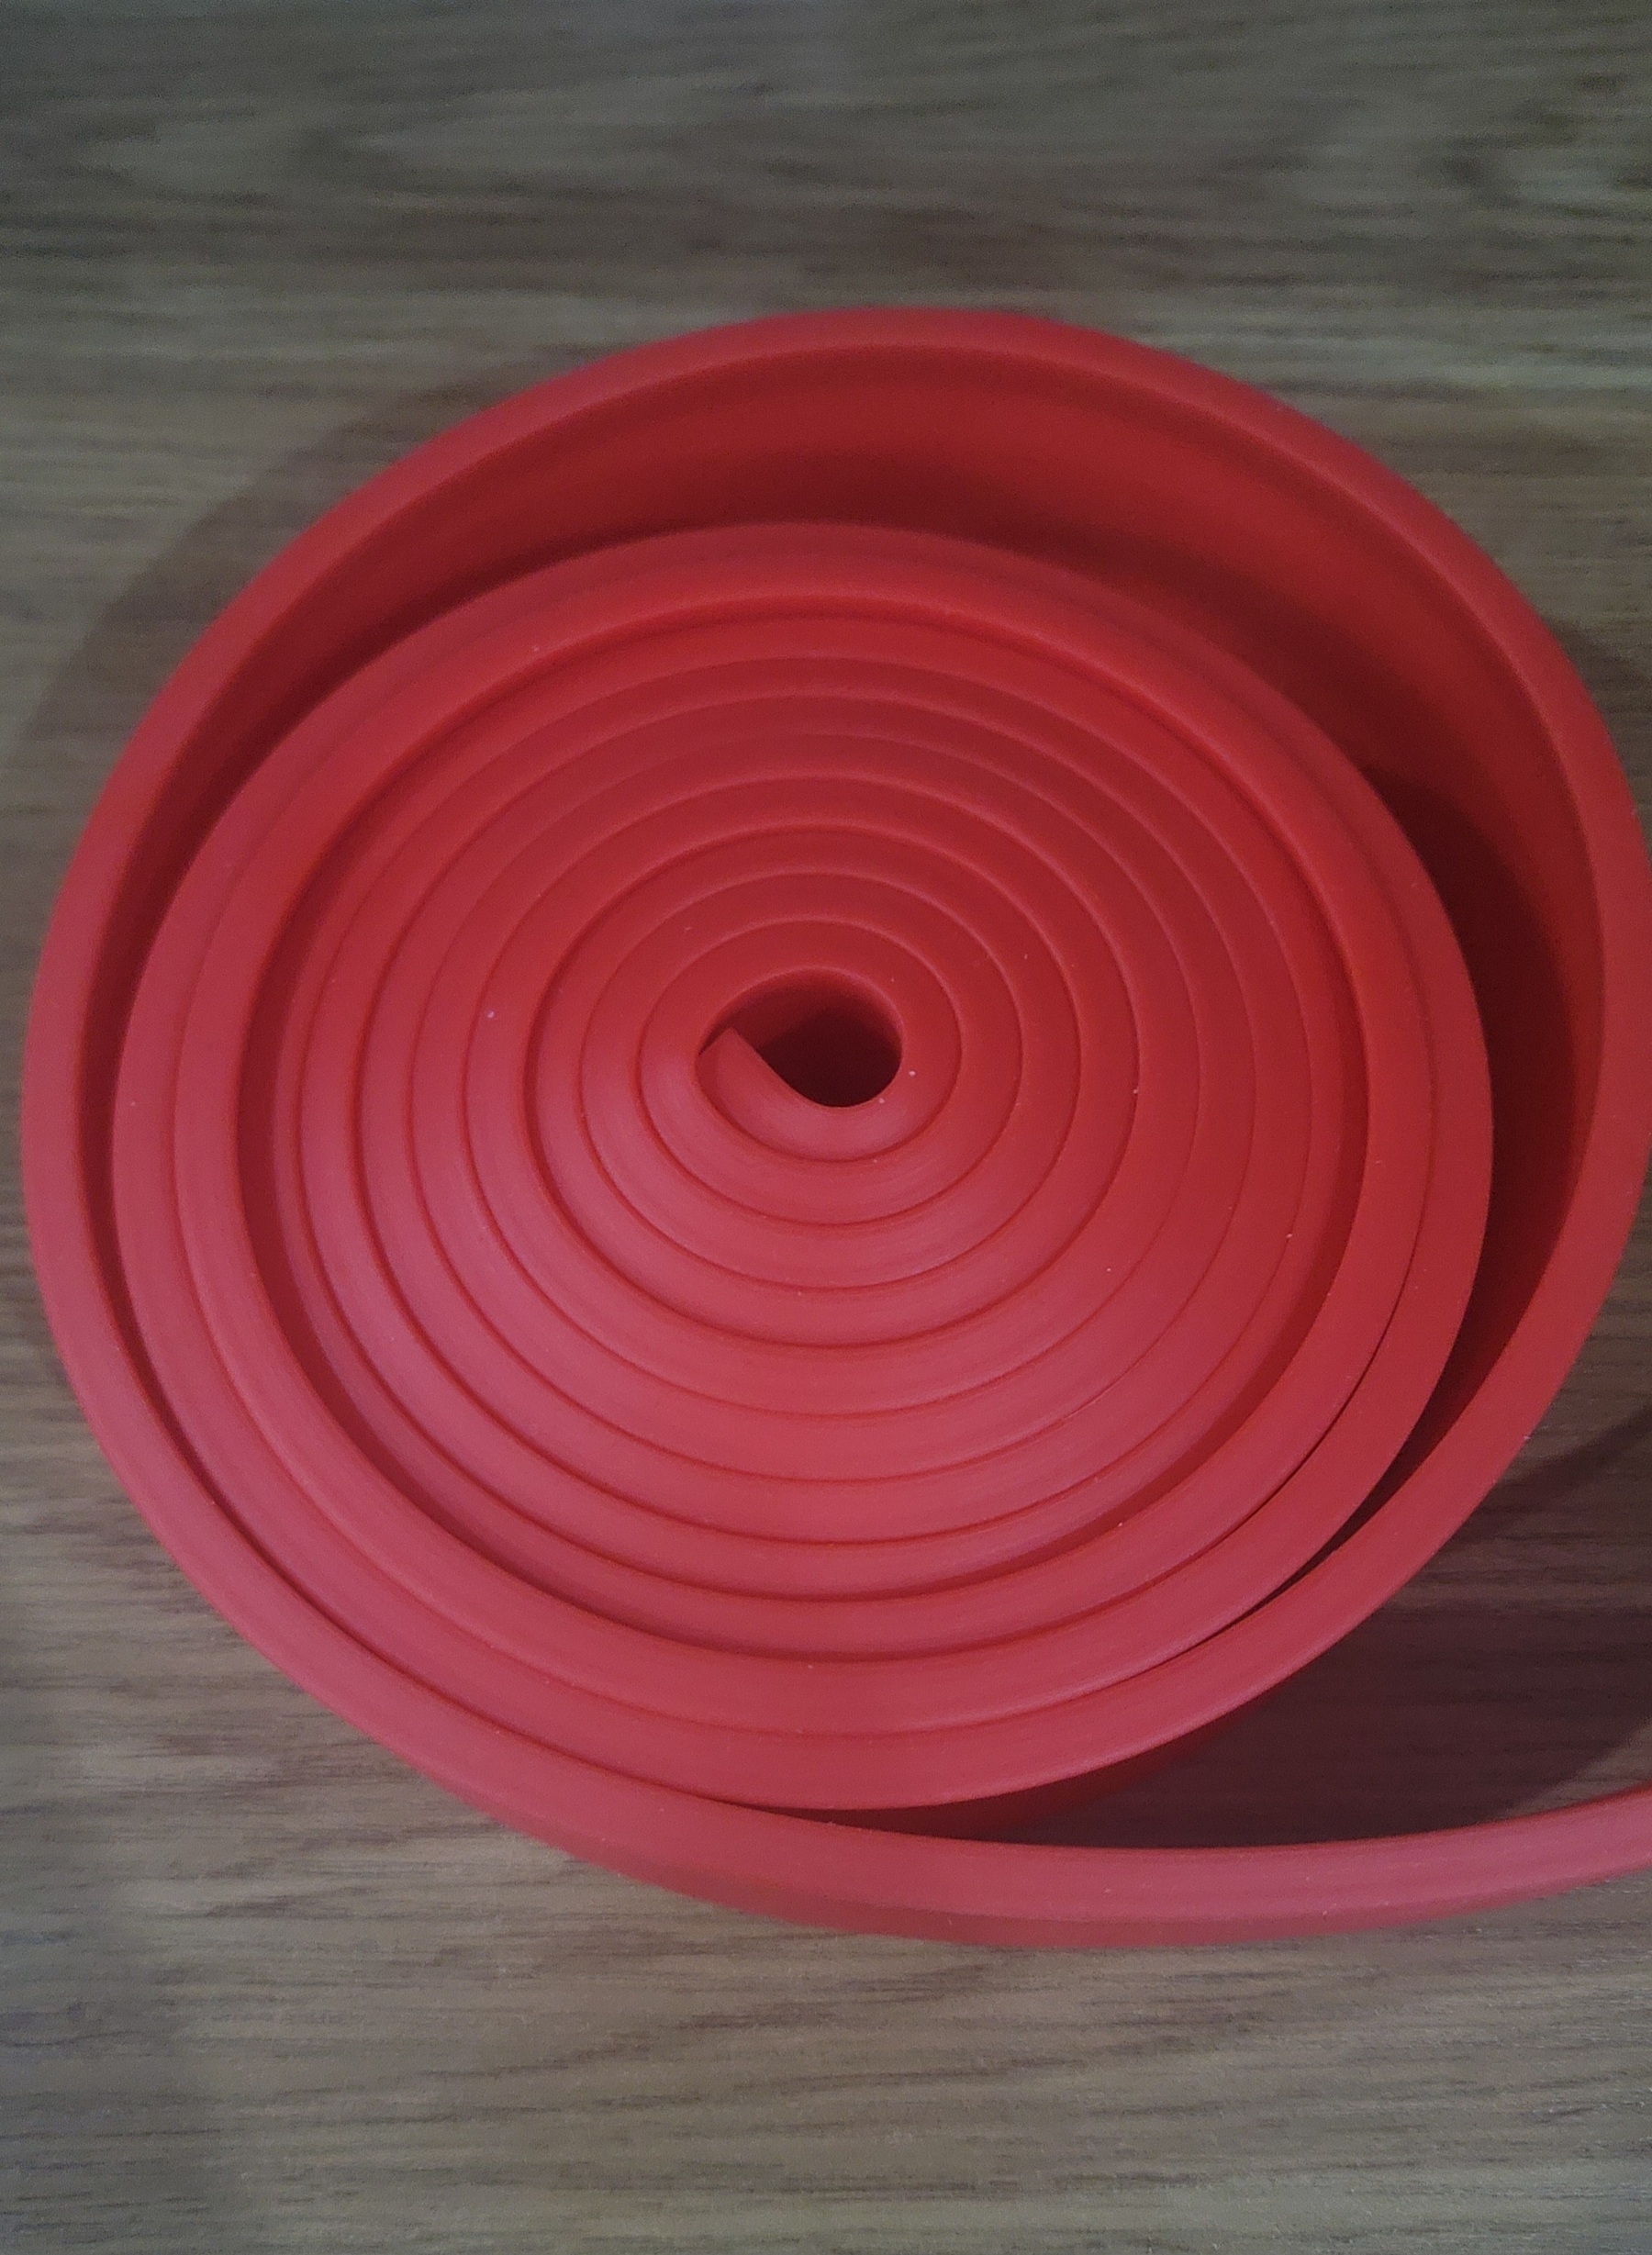 red resistance band on a desk rolled up in a circular shape